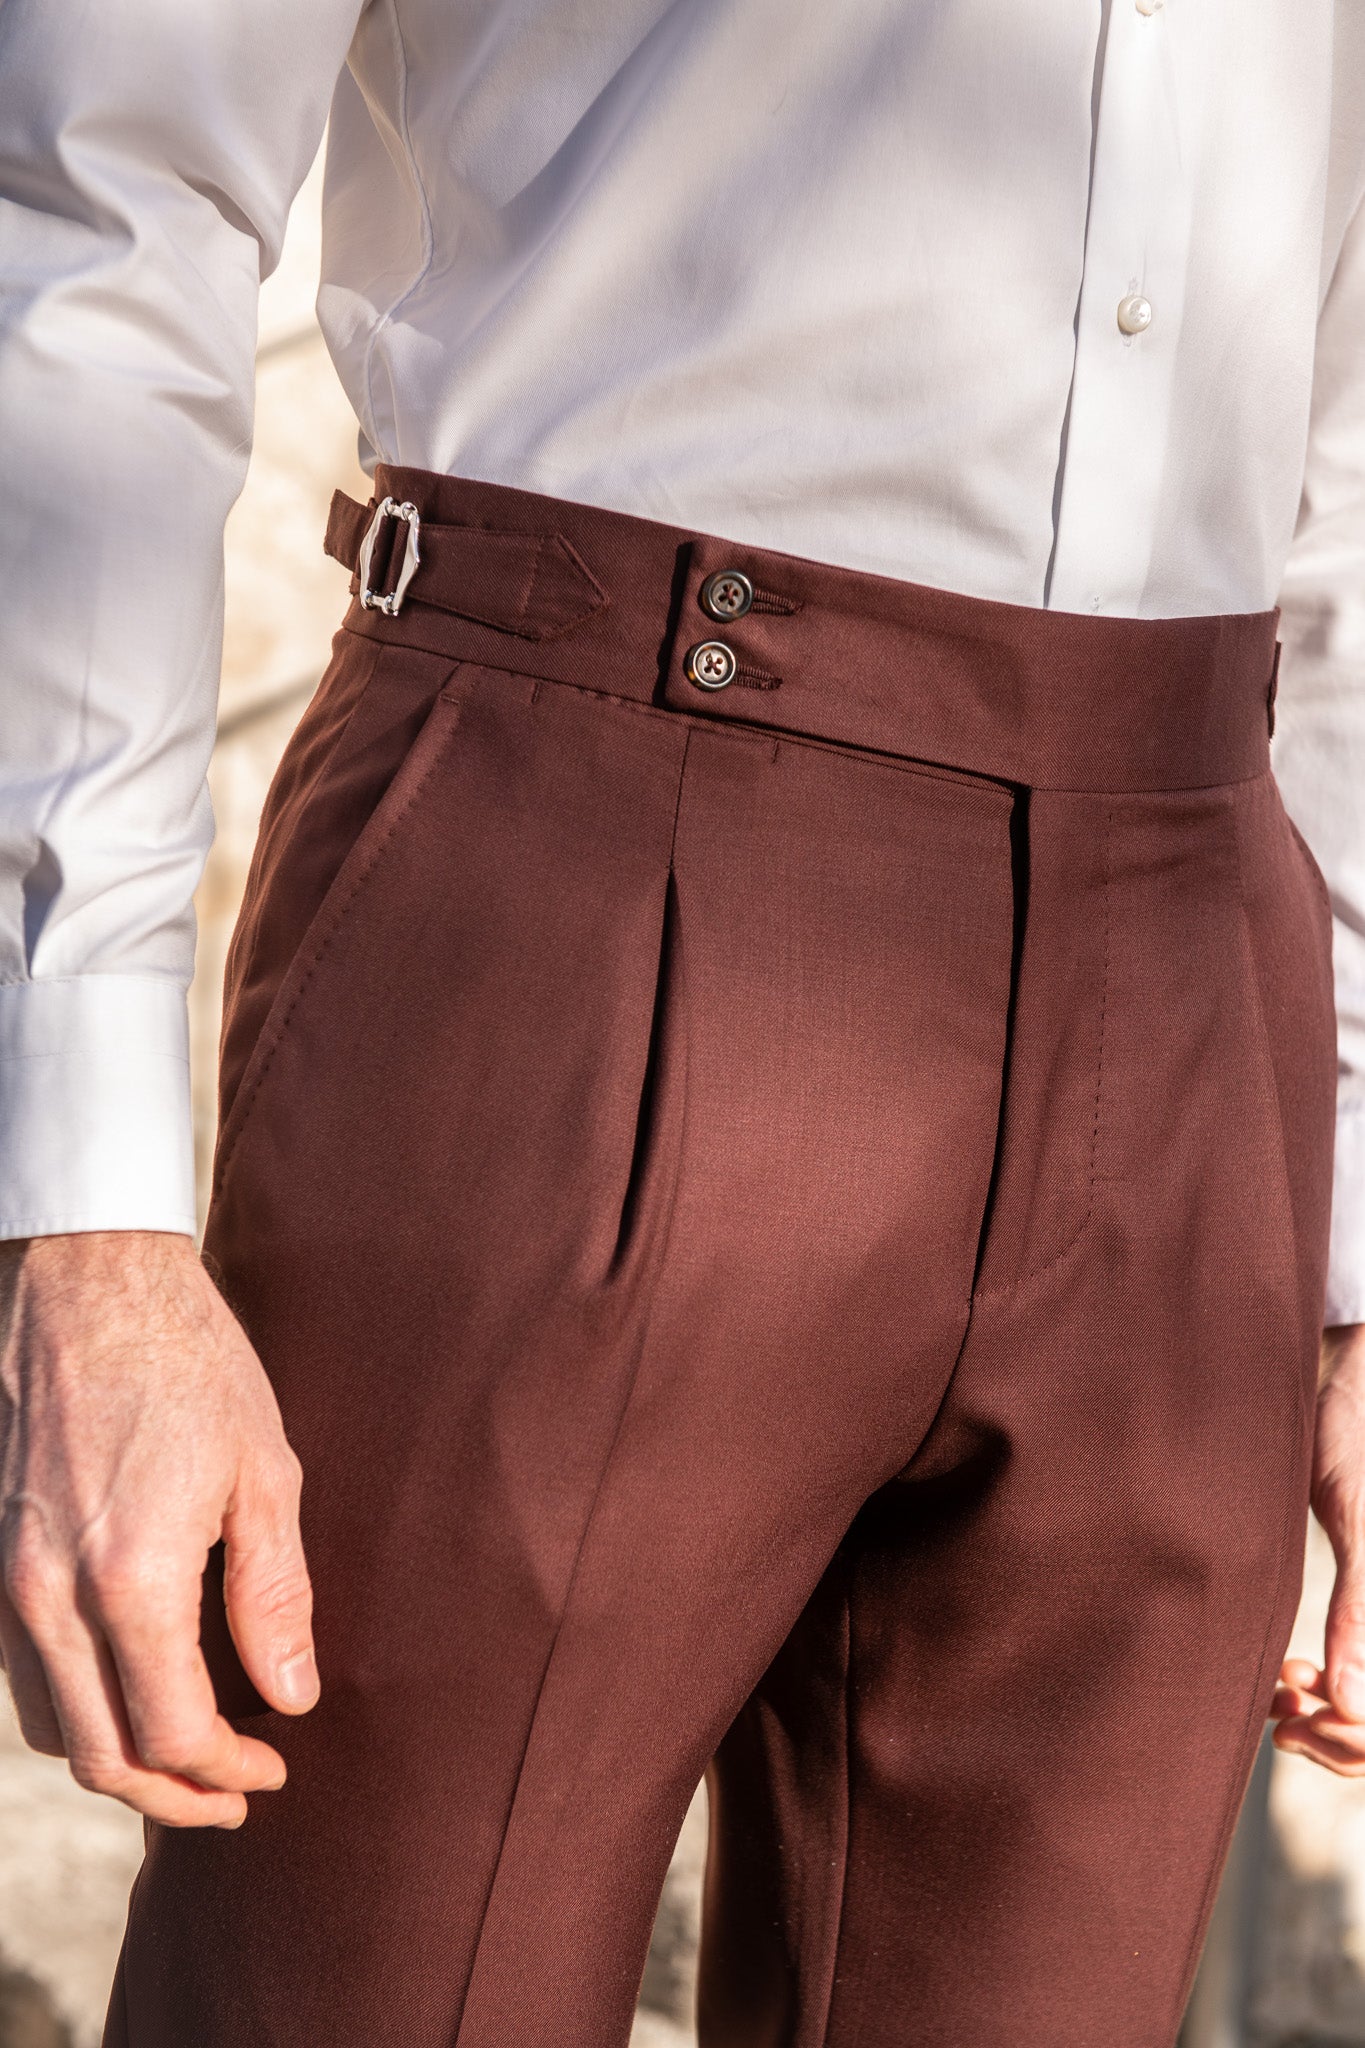 Pantaloni bordeaux " Soragna Capsule Collection" - Made in Italy